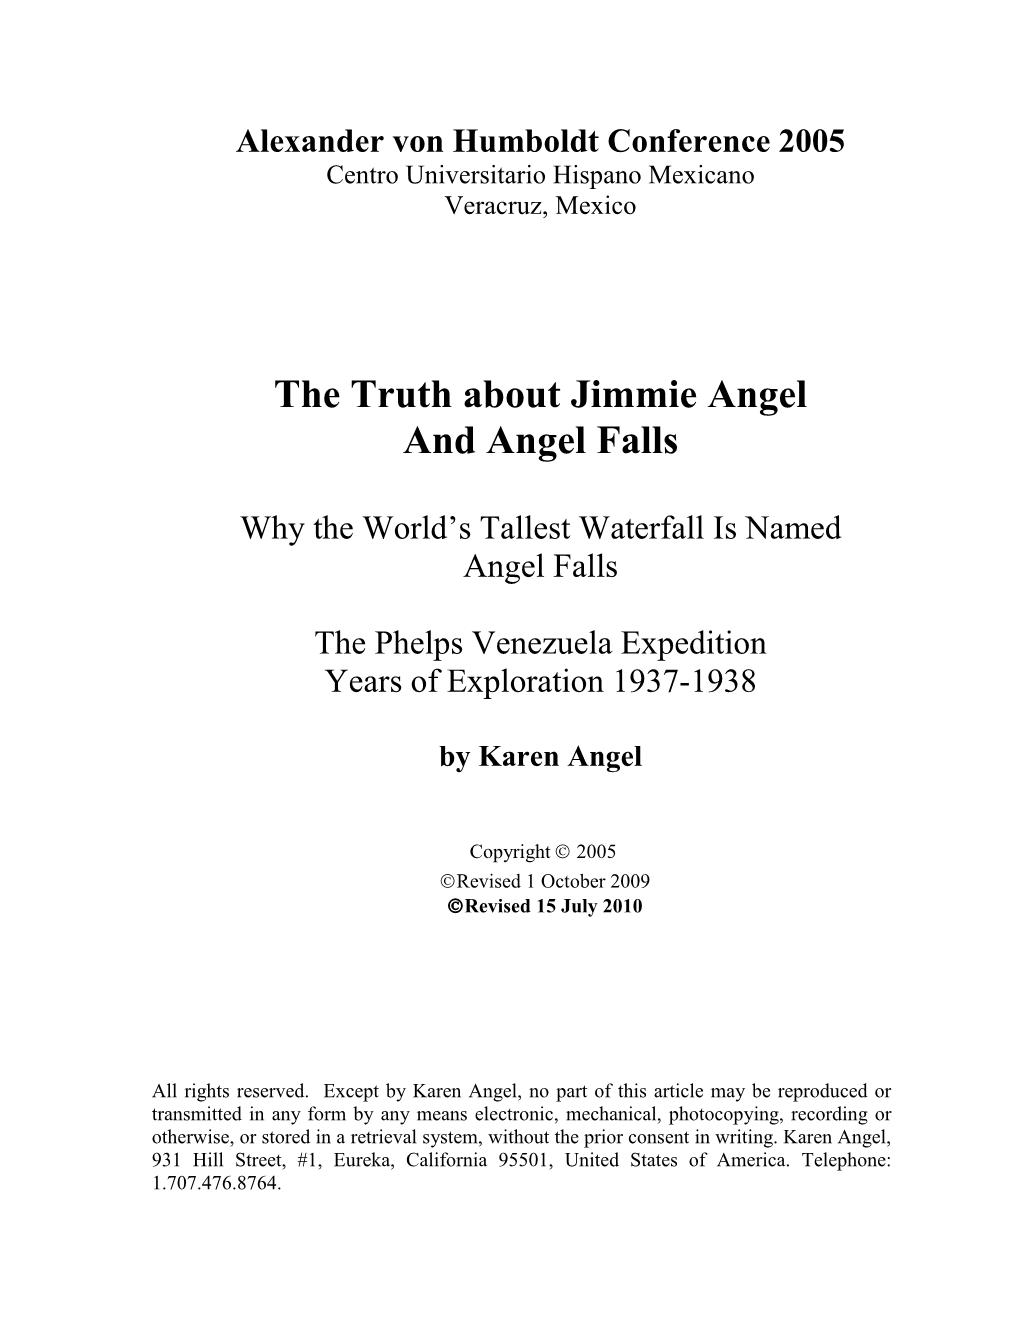 The Truth About Jimmie Angel & Angel Falls